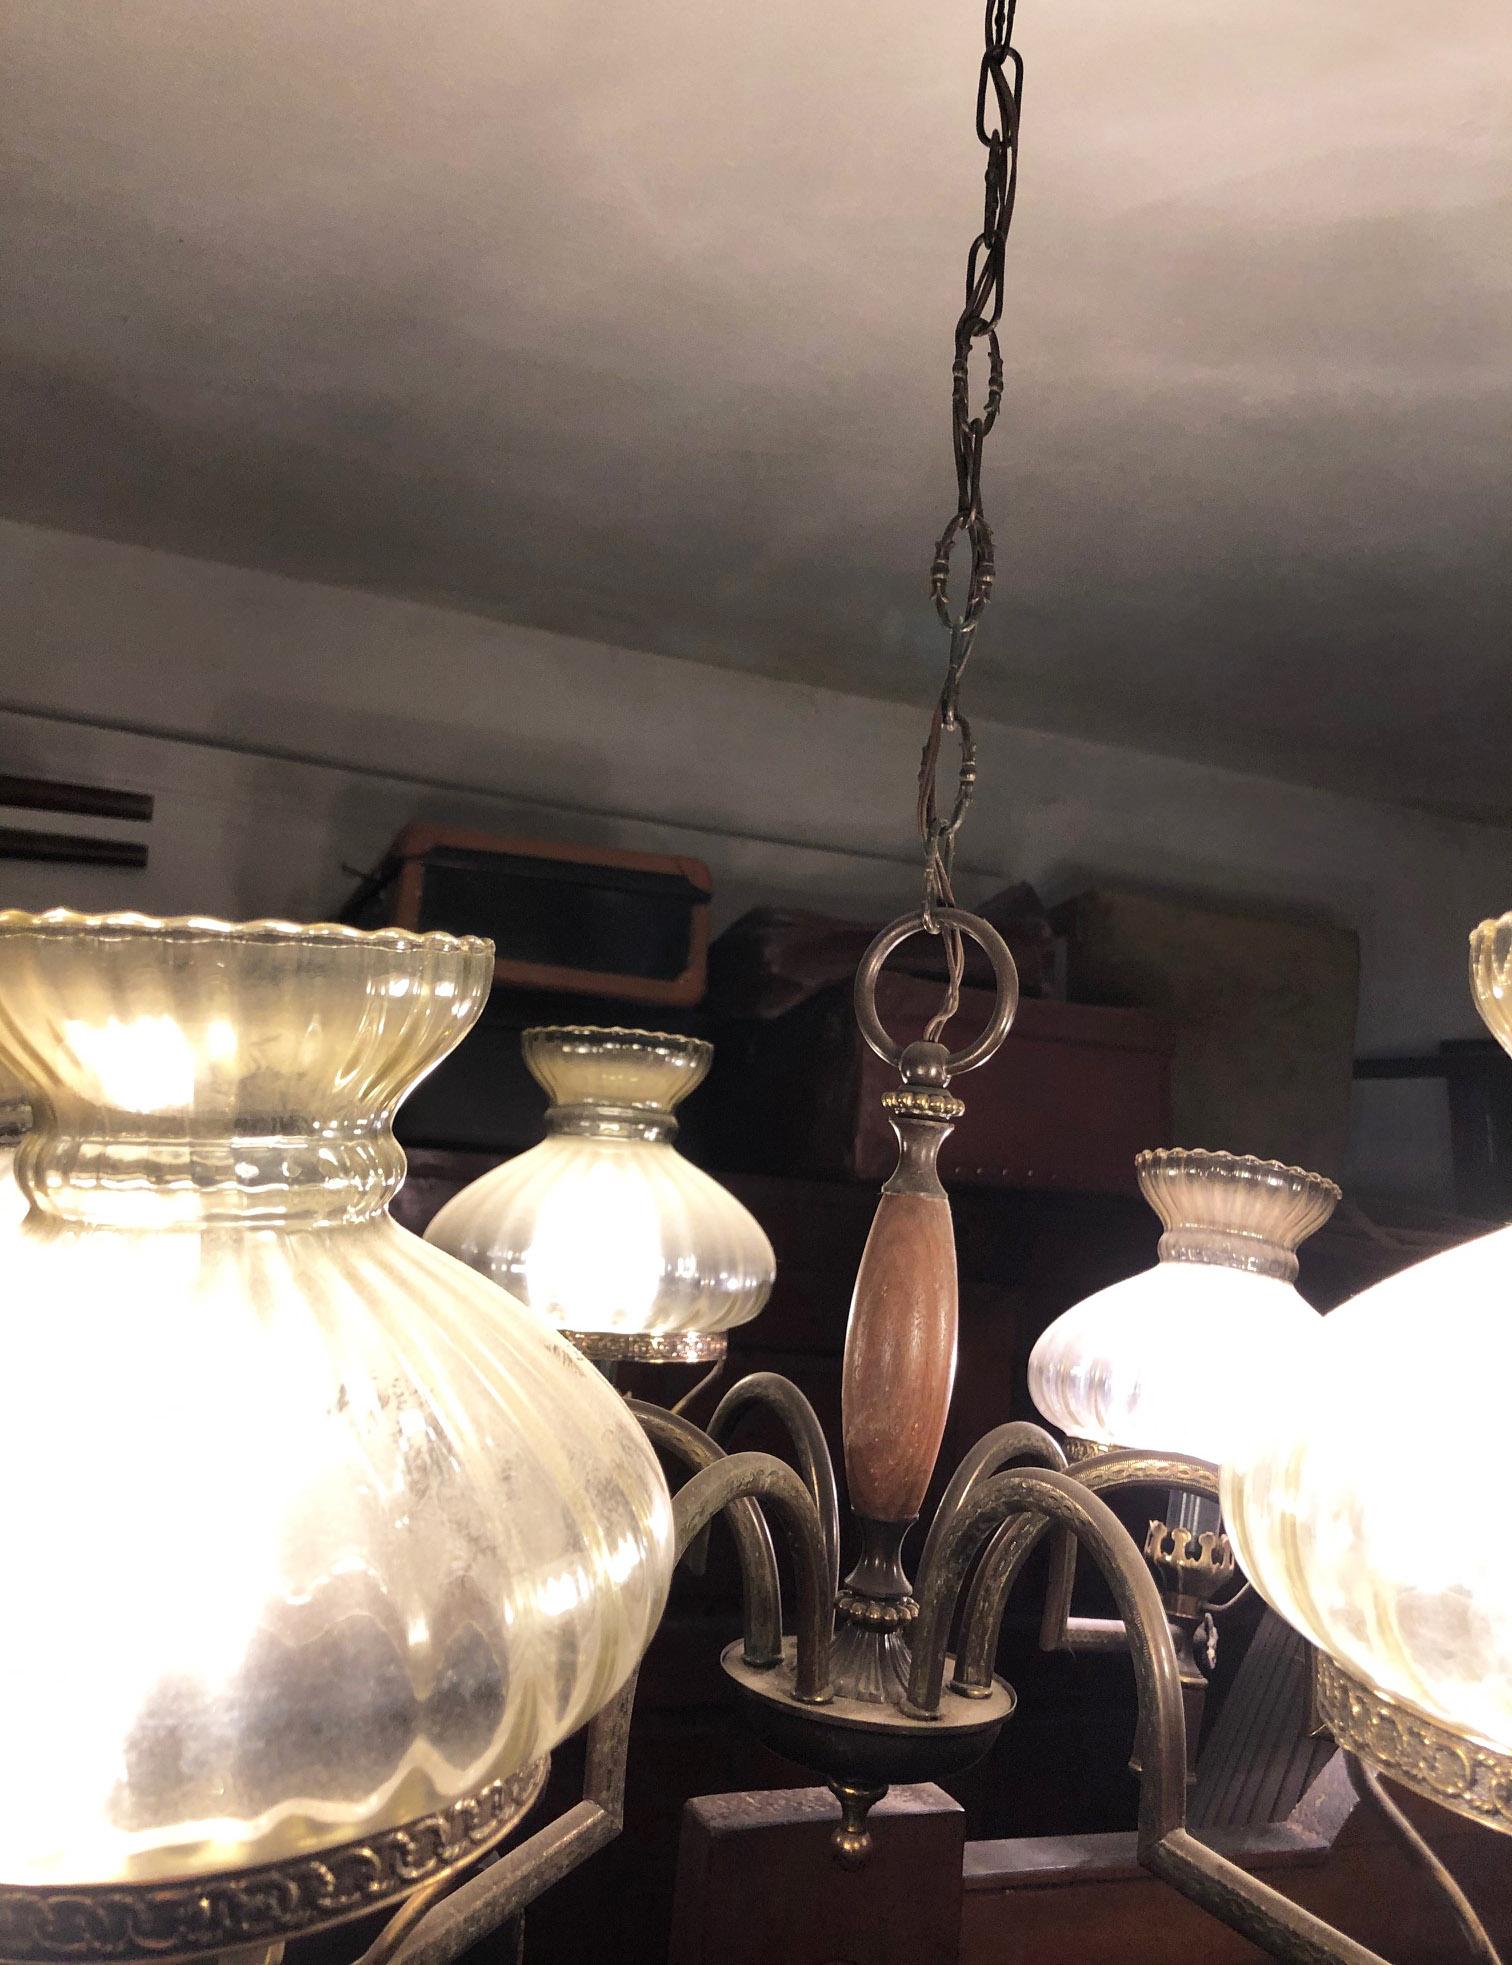 Chandelier from 1960, original, Italian design, six lights, European E14 fixture
Made in wood, metal and glass
In working condition
We recommend buyers consults an experienced electrician for proper installation.
It will be delivered in a specific